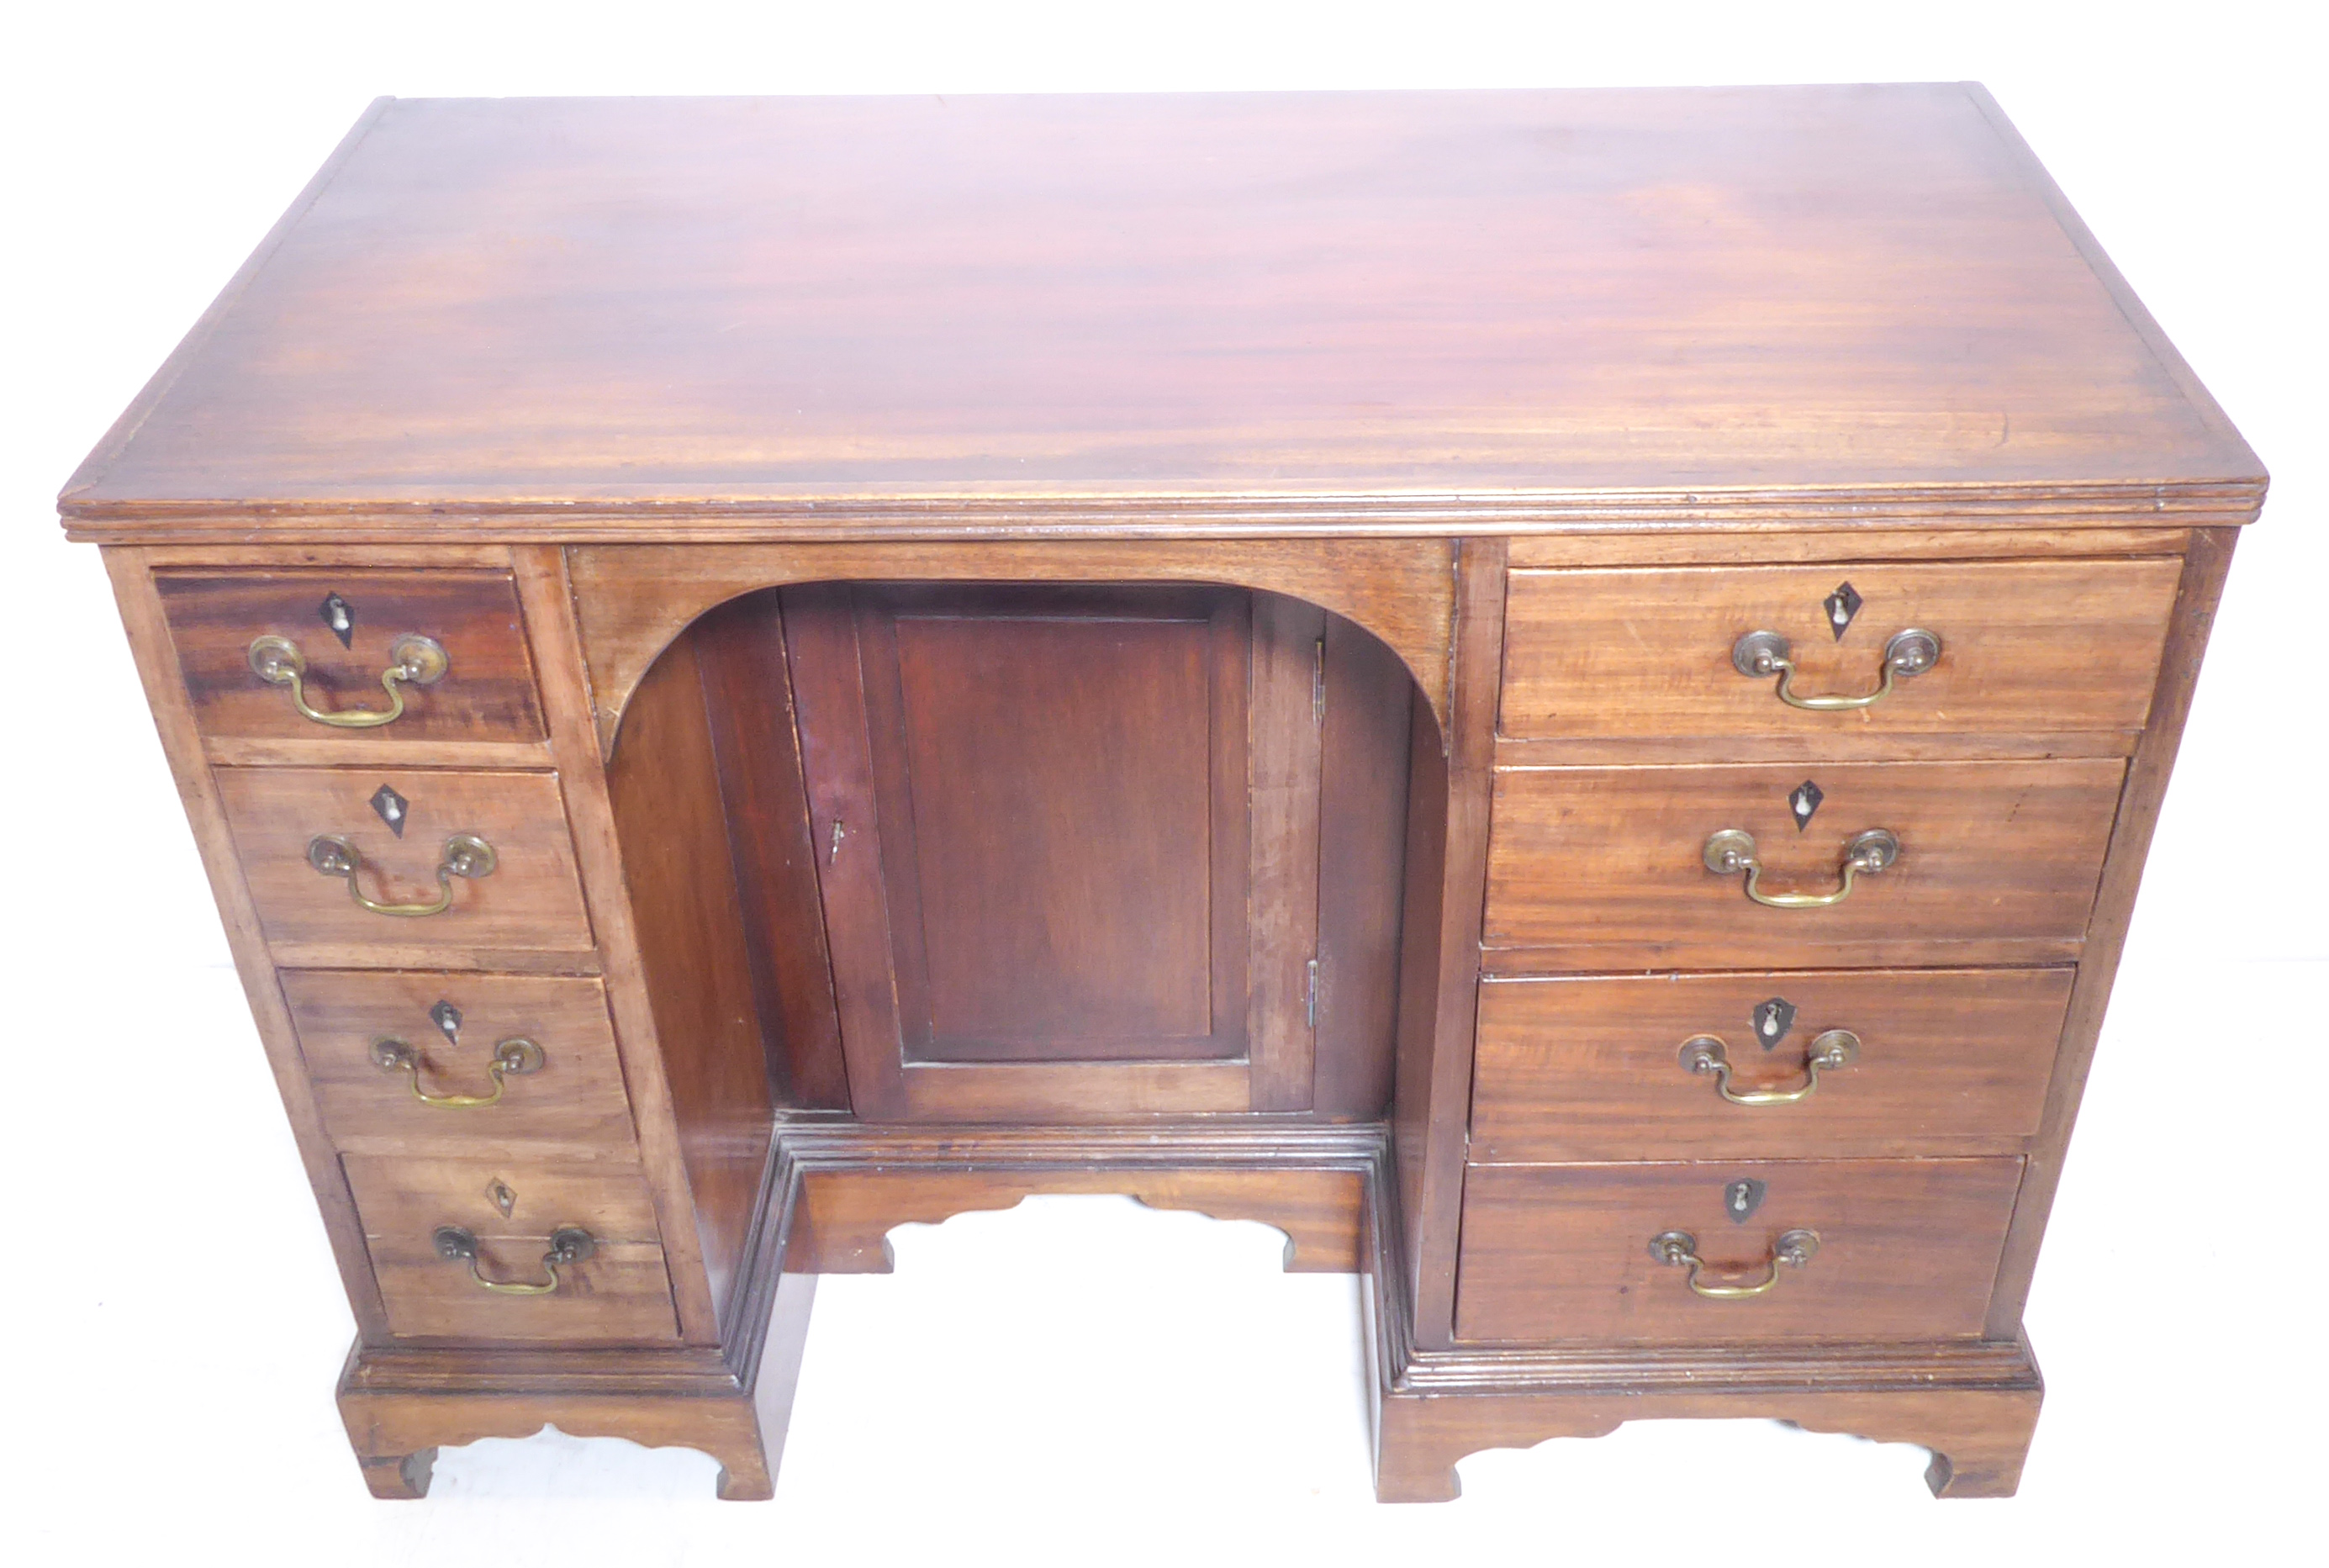 An early 19th century George III period mahogany knee-hole desk - the reeded edge top above recessed